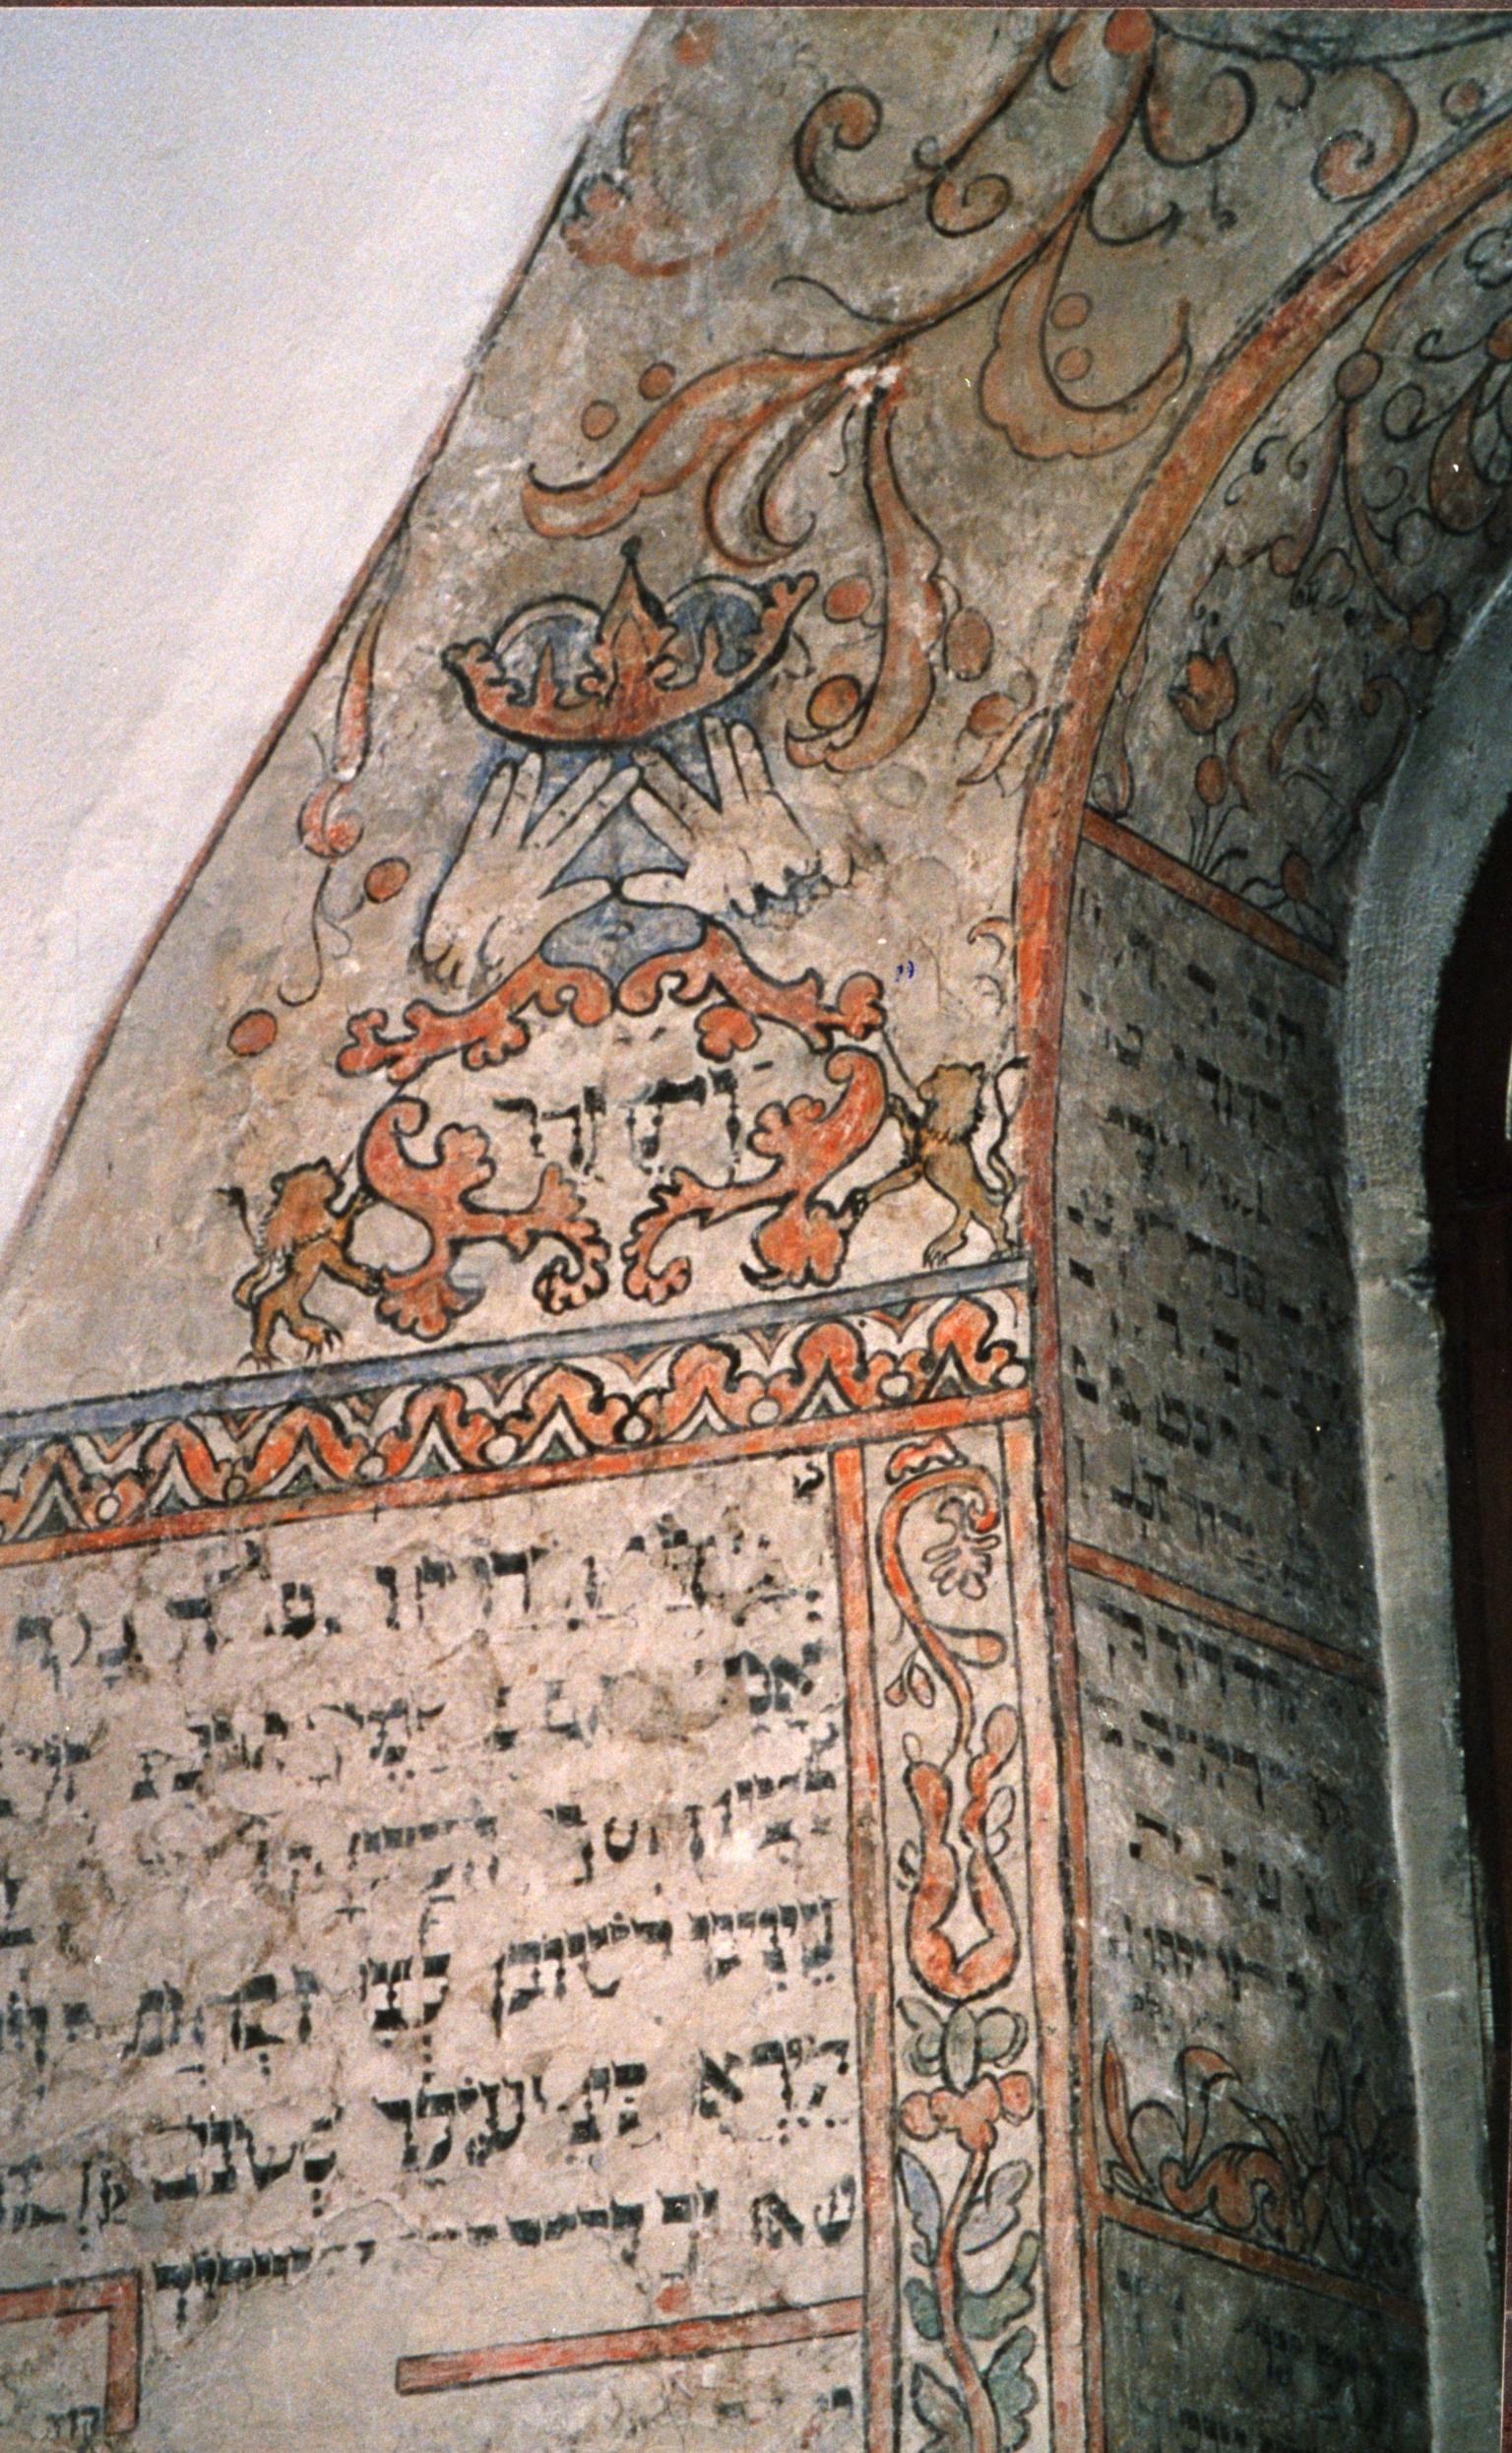 Wall painting with Hebrew text surrounded by floral decorations and two hands beneath a crown.  